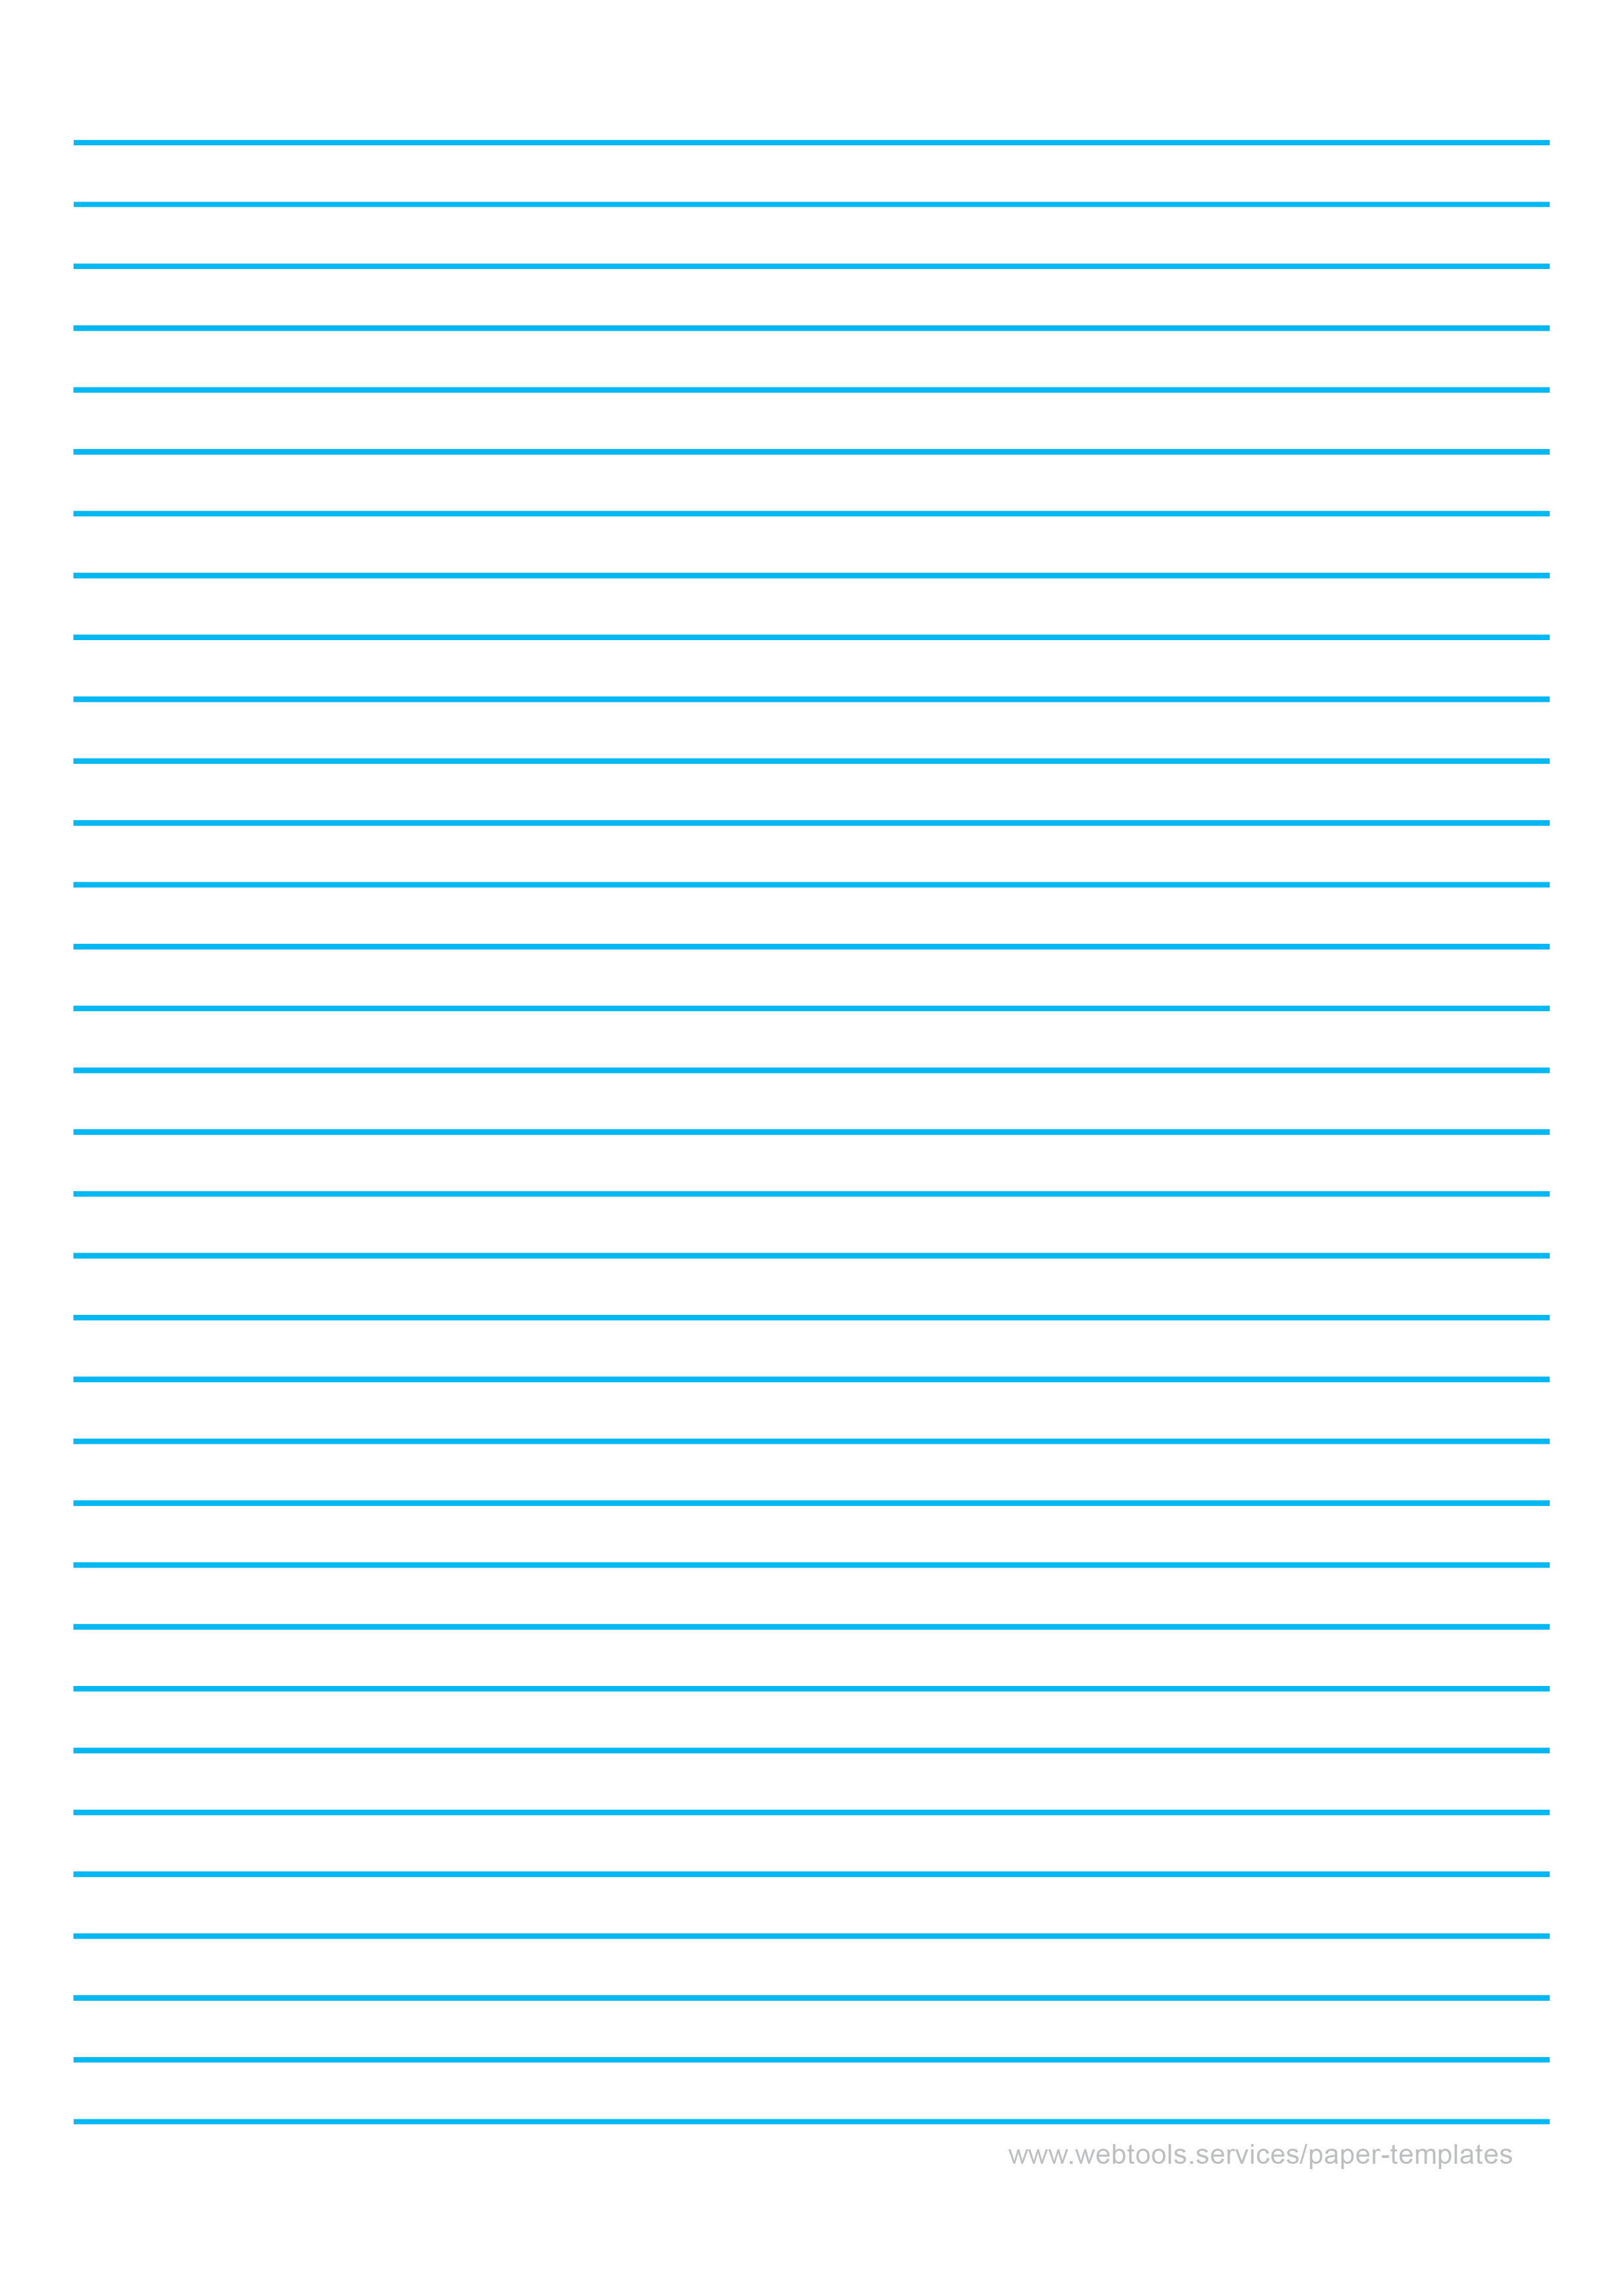 hindi notebook page with blue lines